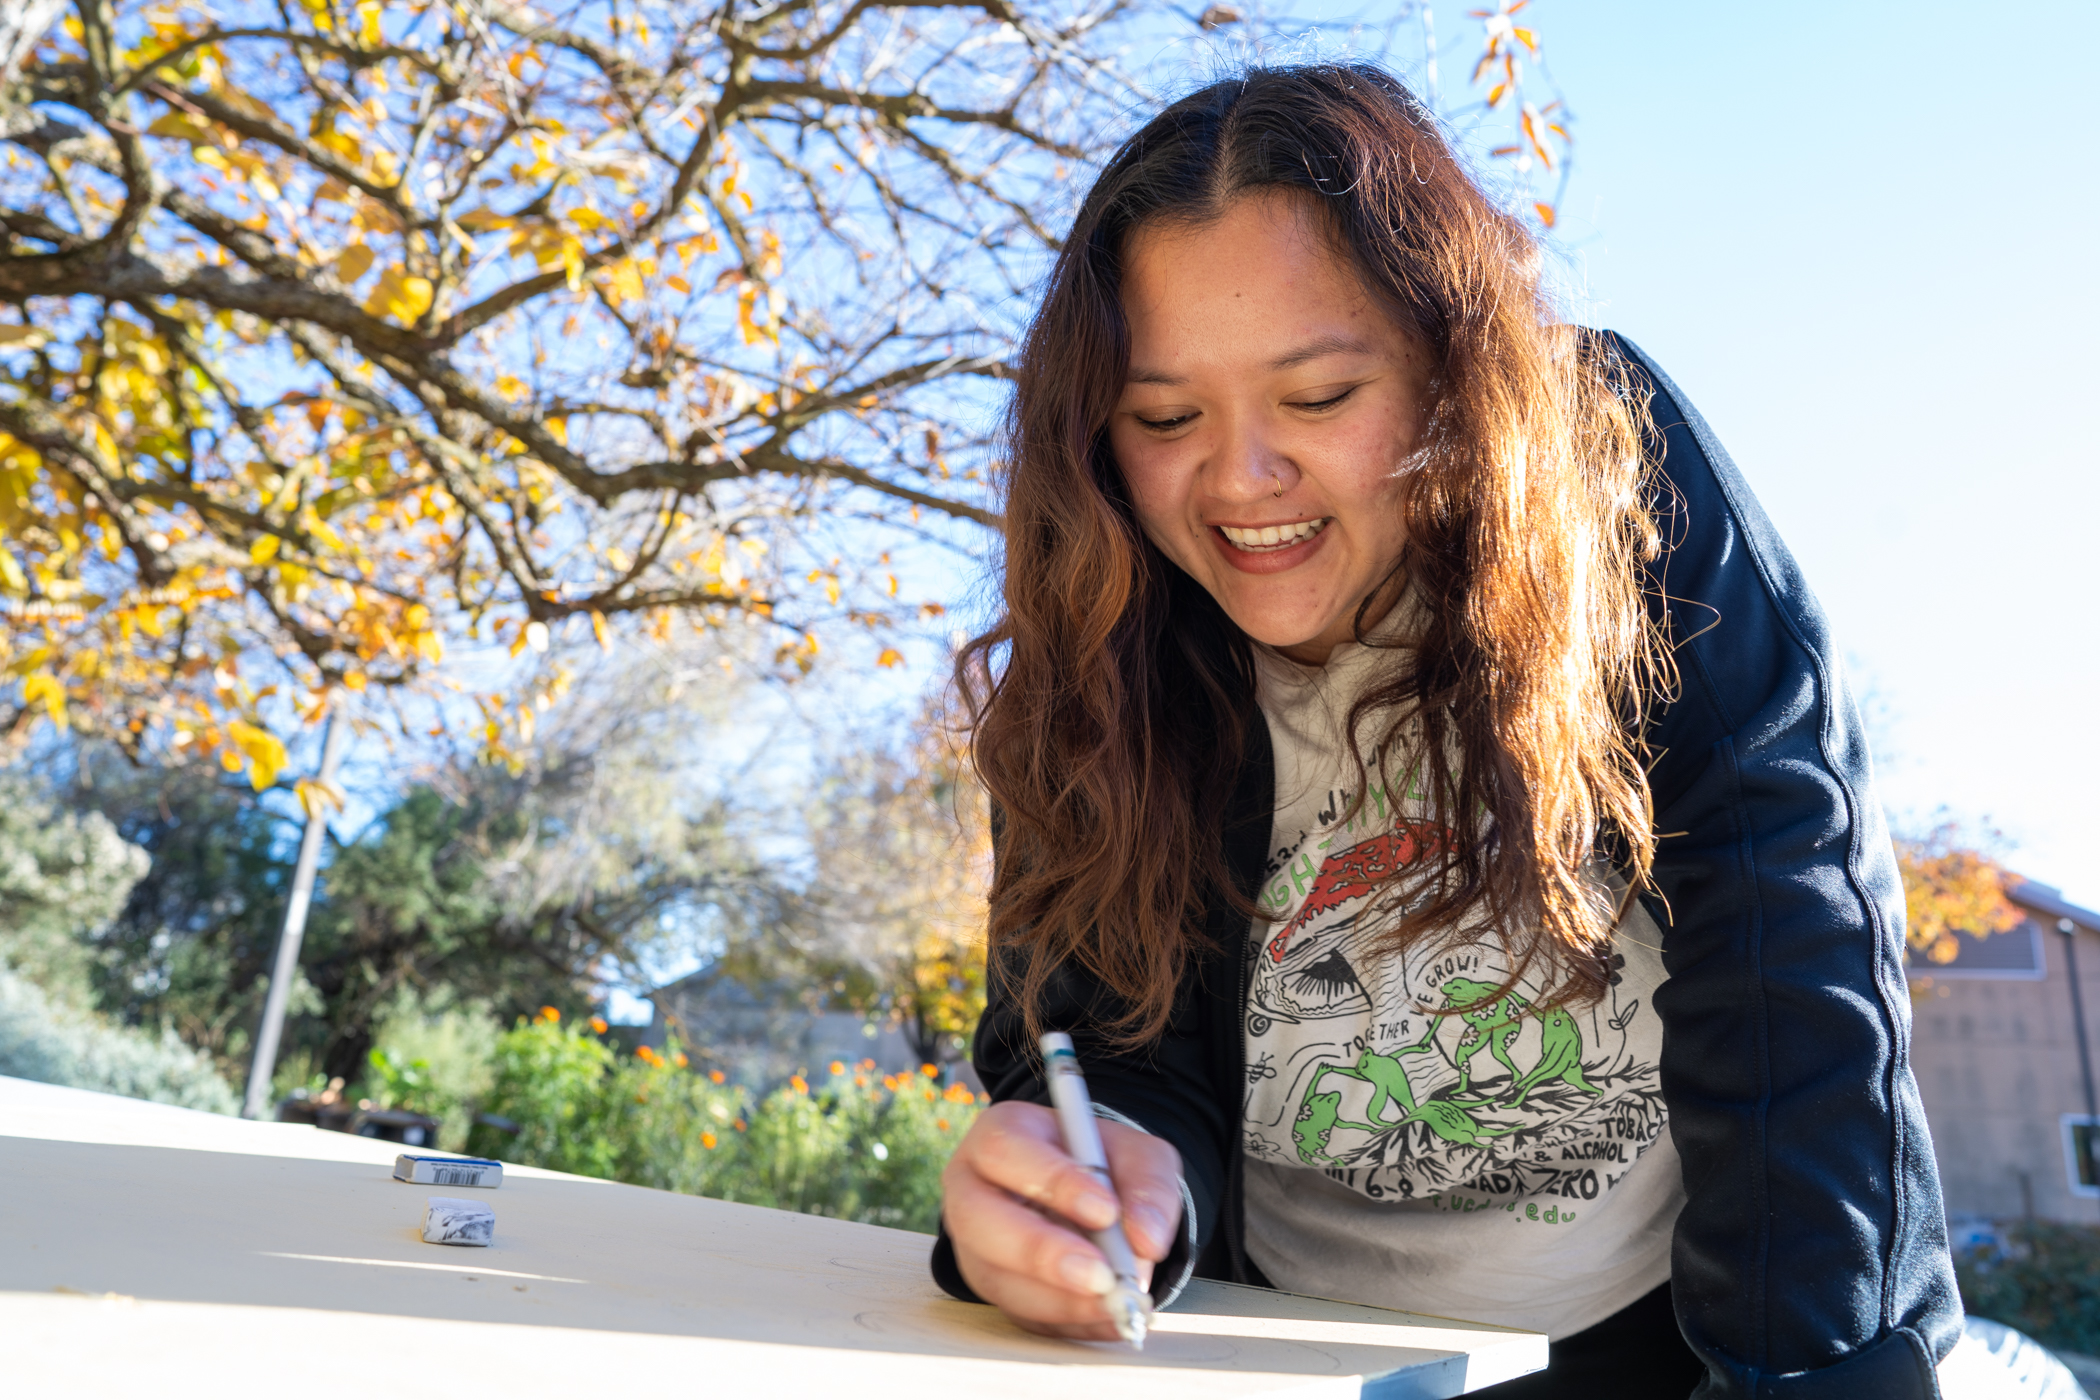 A person working outdoors holding a crayon to draw.